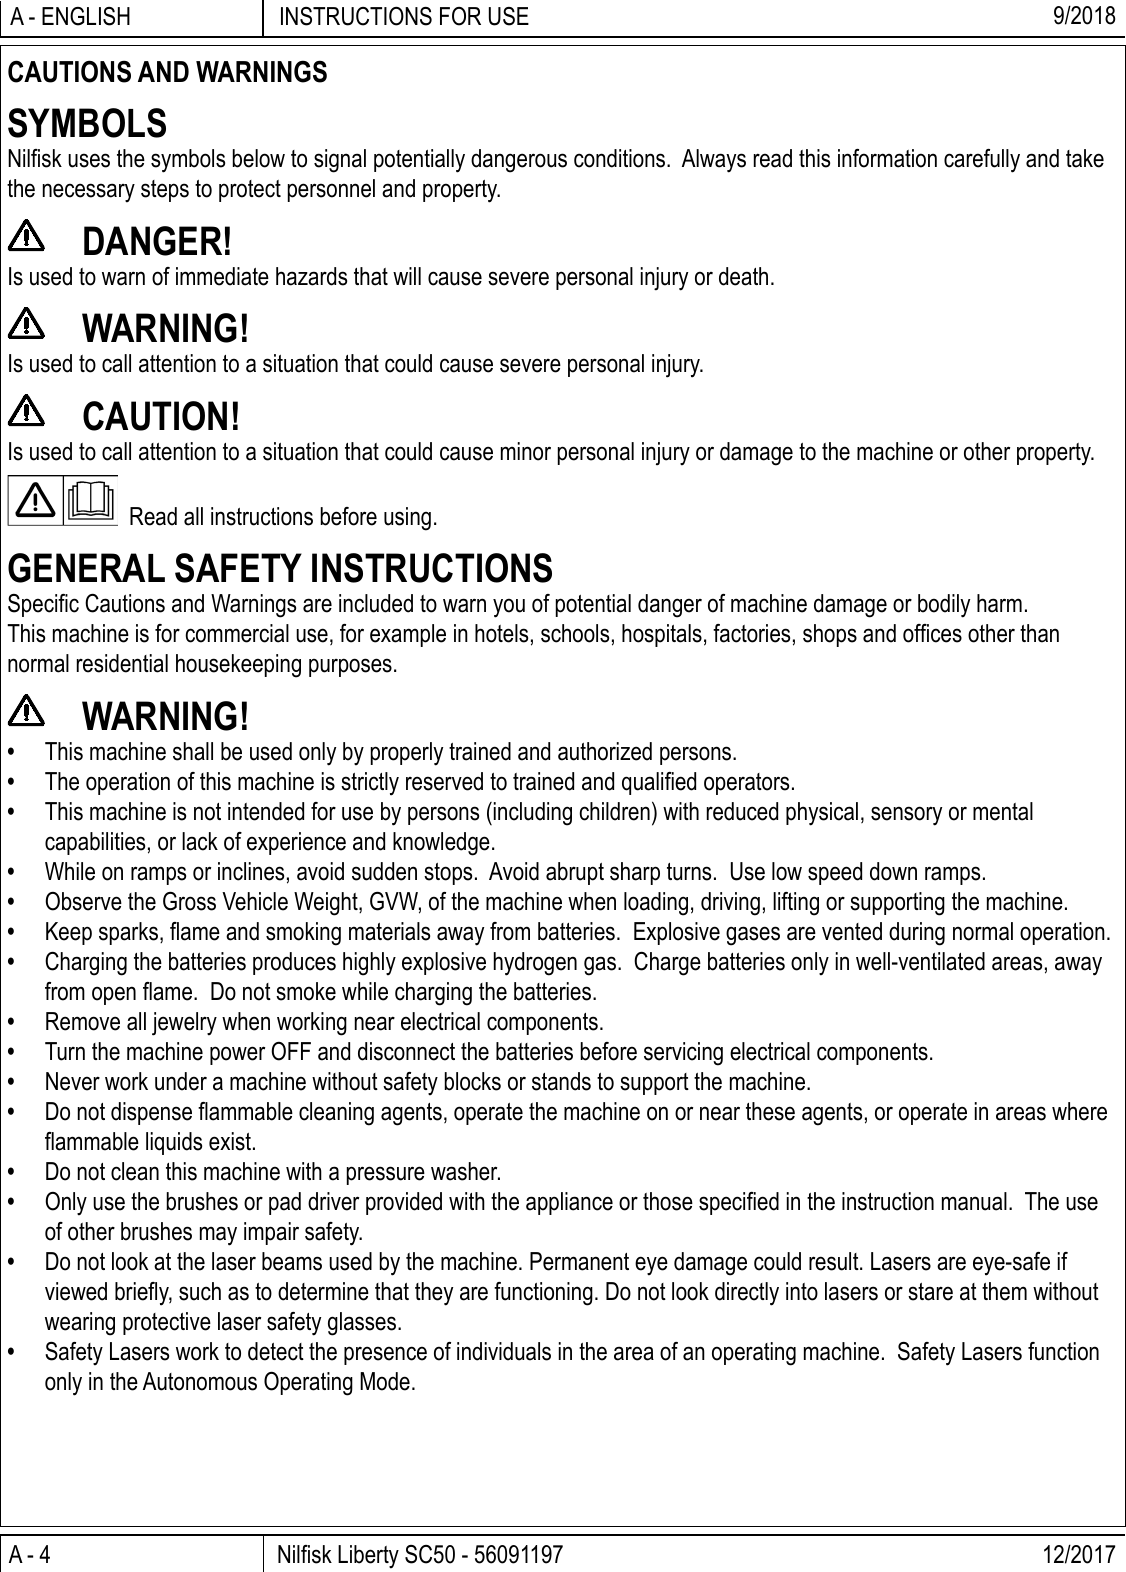 A - 4 Nilﬁ sk Liberty SC50 - 56091197 12/2017INSTRUCTIONS FOR USEA - ENGLISH 9/2018CAUTIONS AND WARNINGSSYMBOLSNilﬁ sk uses the symbols below to signal potentially dangerous conditions.  Always read this information carefully and take the necessary steps to protect personnel and property. DANGER!Is used to warn of immediate hazards that will cause severe personal injury or death. WARNING!Is used to call attention to a situation that could cause severe personal injury. CAUTION!Is used to call attention to a situation that could cause minor personal injury or damage to the machine or other property.  Read all instructions before using.GENERAL SAFETY INSTRUCTIONSSpeciﬁ c Cautions and Warnings are included to warn you of potential danger of machine damage or bodily harm.This machine is for commercial use, for example in hotels, schools, hospitals, factories, shops and ofﬁ ces other than normal residential housekeeping purposes. WARNING!•  This machine shall be used only by properly trained and authorized persons.•  The operation of this machine is strictly reserved to trained and qualiﬁ ed operators.•  This machine is not intended for use by persons (including children) with reduced physical, sensory or mental capabilities, or lack of experience and knowledge.•  While on ramps or inclines, avoid sudden stops.  Avoid abrupt sharp turns.  Use low speed down ramps.•  Observe the Gross Vehicle Weight, GVW, of the machine when loading, driving, lifting or supporting the machine.• Keep sparks, ﬂ ame and smoking materials away from batteries.  Explosive gases are vented during normal operation.•  Charging the batteries produces highly explosive hydrogen gas.  Charge batteries only in well-ventilated areas, away from open ﬂ ame.  Do not smoke while charging the batteries.•  Remove all jewelry when working near electrical components.•  Turn the machine power OFF and disconnect the batteries before servicing electrical components.•  Never work under a machine without safety blocks or stands to support the machine.•  Do not dispense ﬂ ammable cleaning agents, operate the machine on or near these agents, or operate in areas where ﬂ ammable liquids exist.•  Do not clean this machine with a pressure washer.•  Only use the brushes or pad driver provided with the appliance or those speciﬁ ed in the instruction manual.  The use of other brushes may impair safety.•  Do not look at the laser beams used by the machine. Permanent eye damage could result. Lasers are eye-safe if viewed brieﬂ y, such as to determine that they are functioning. Do not look directly into lasers or stare at them without wearing protective laser safety glasses.•  Safety Lasers work to detect the presence of individuals in the area of an operating machine.  Safety Lasers function only in the Autonomous Operating Mode.